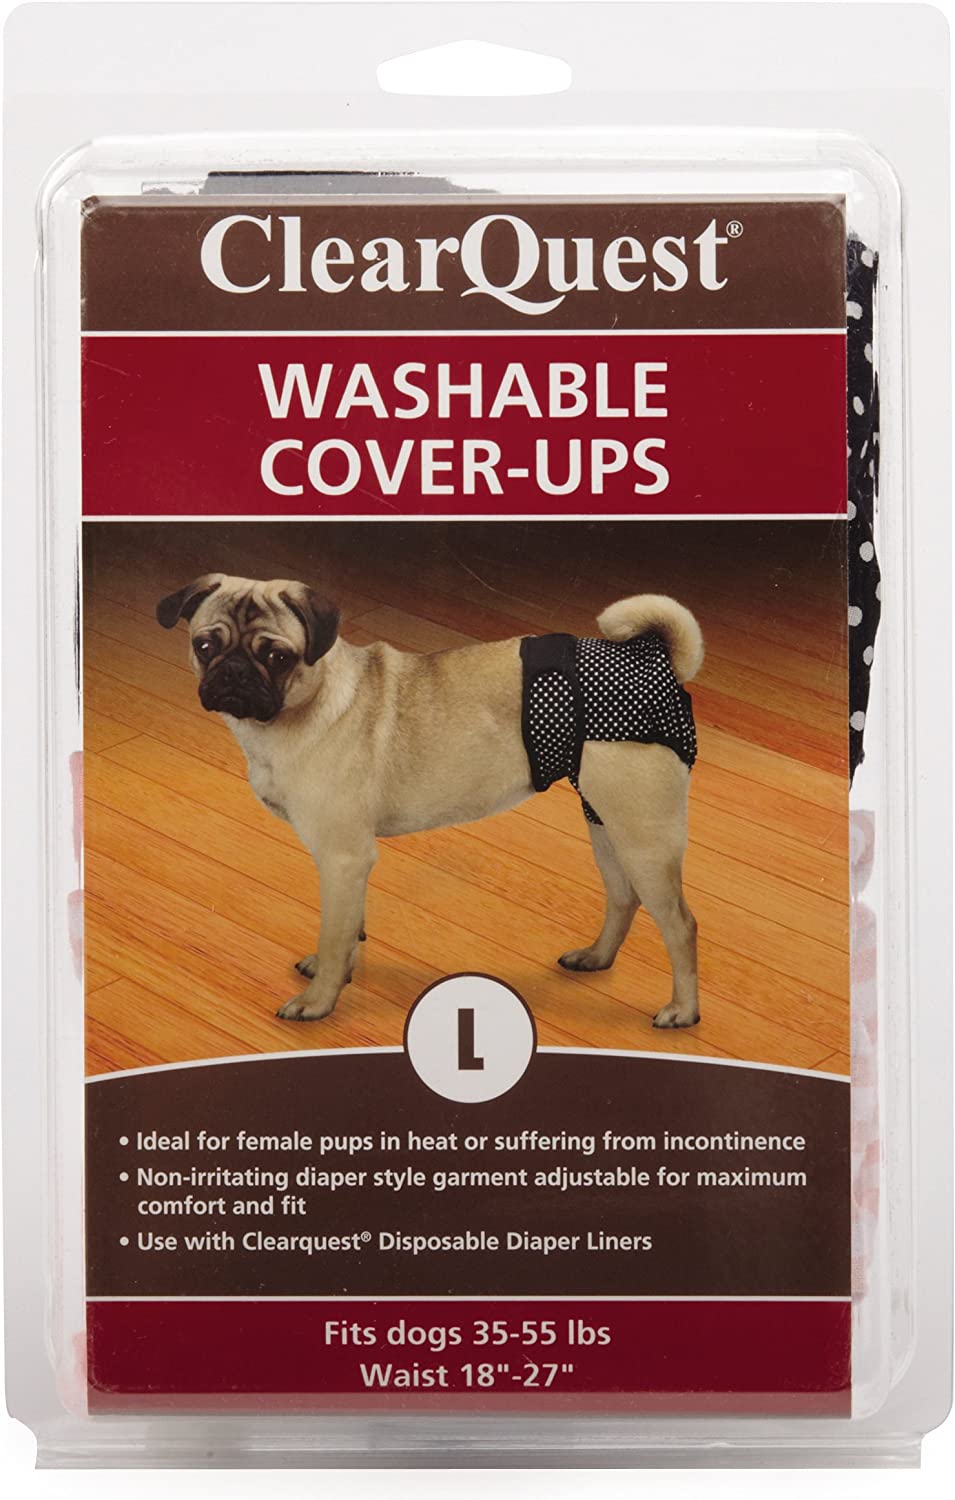 12. ClearQuest Wetness and Stain Protecting Dog Diapers